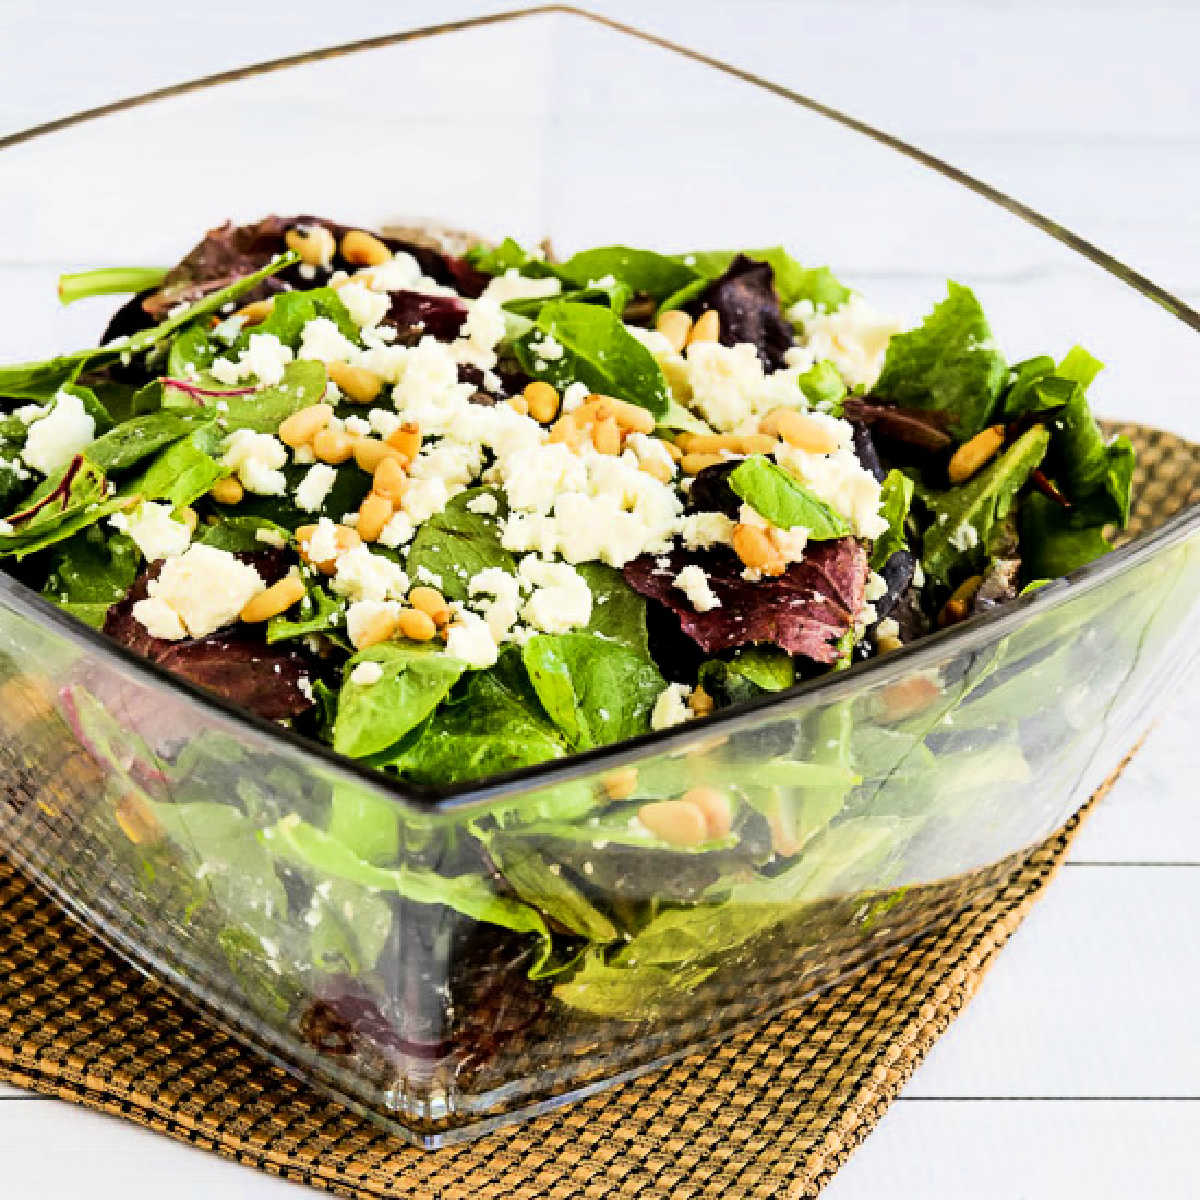 Square image of Spring Mix Salad in glass serving bowl with pine nuts and Feta.